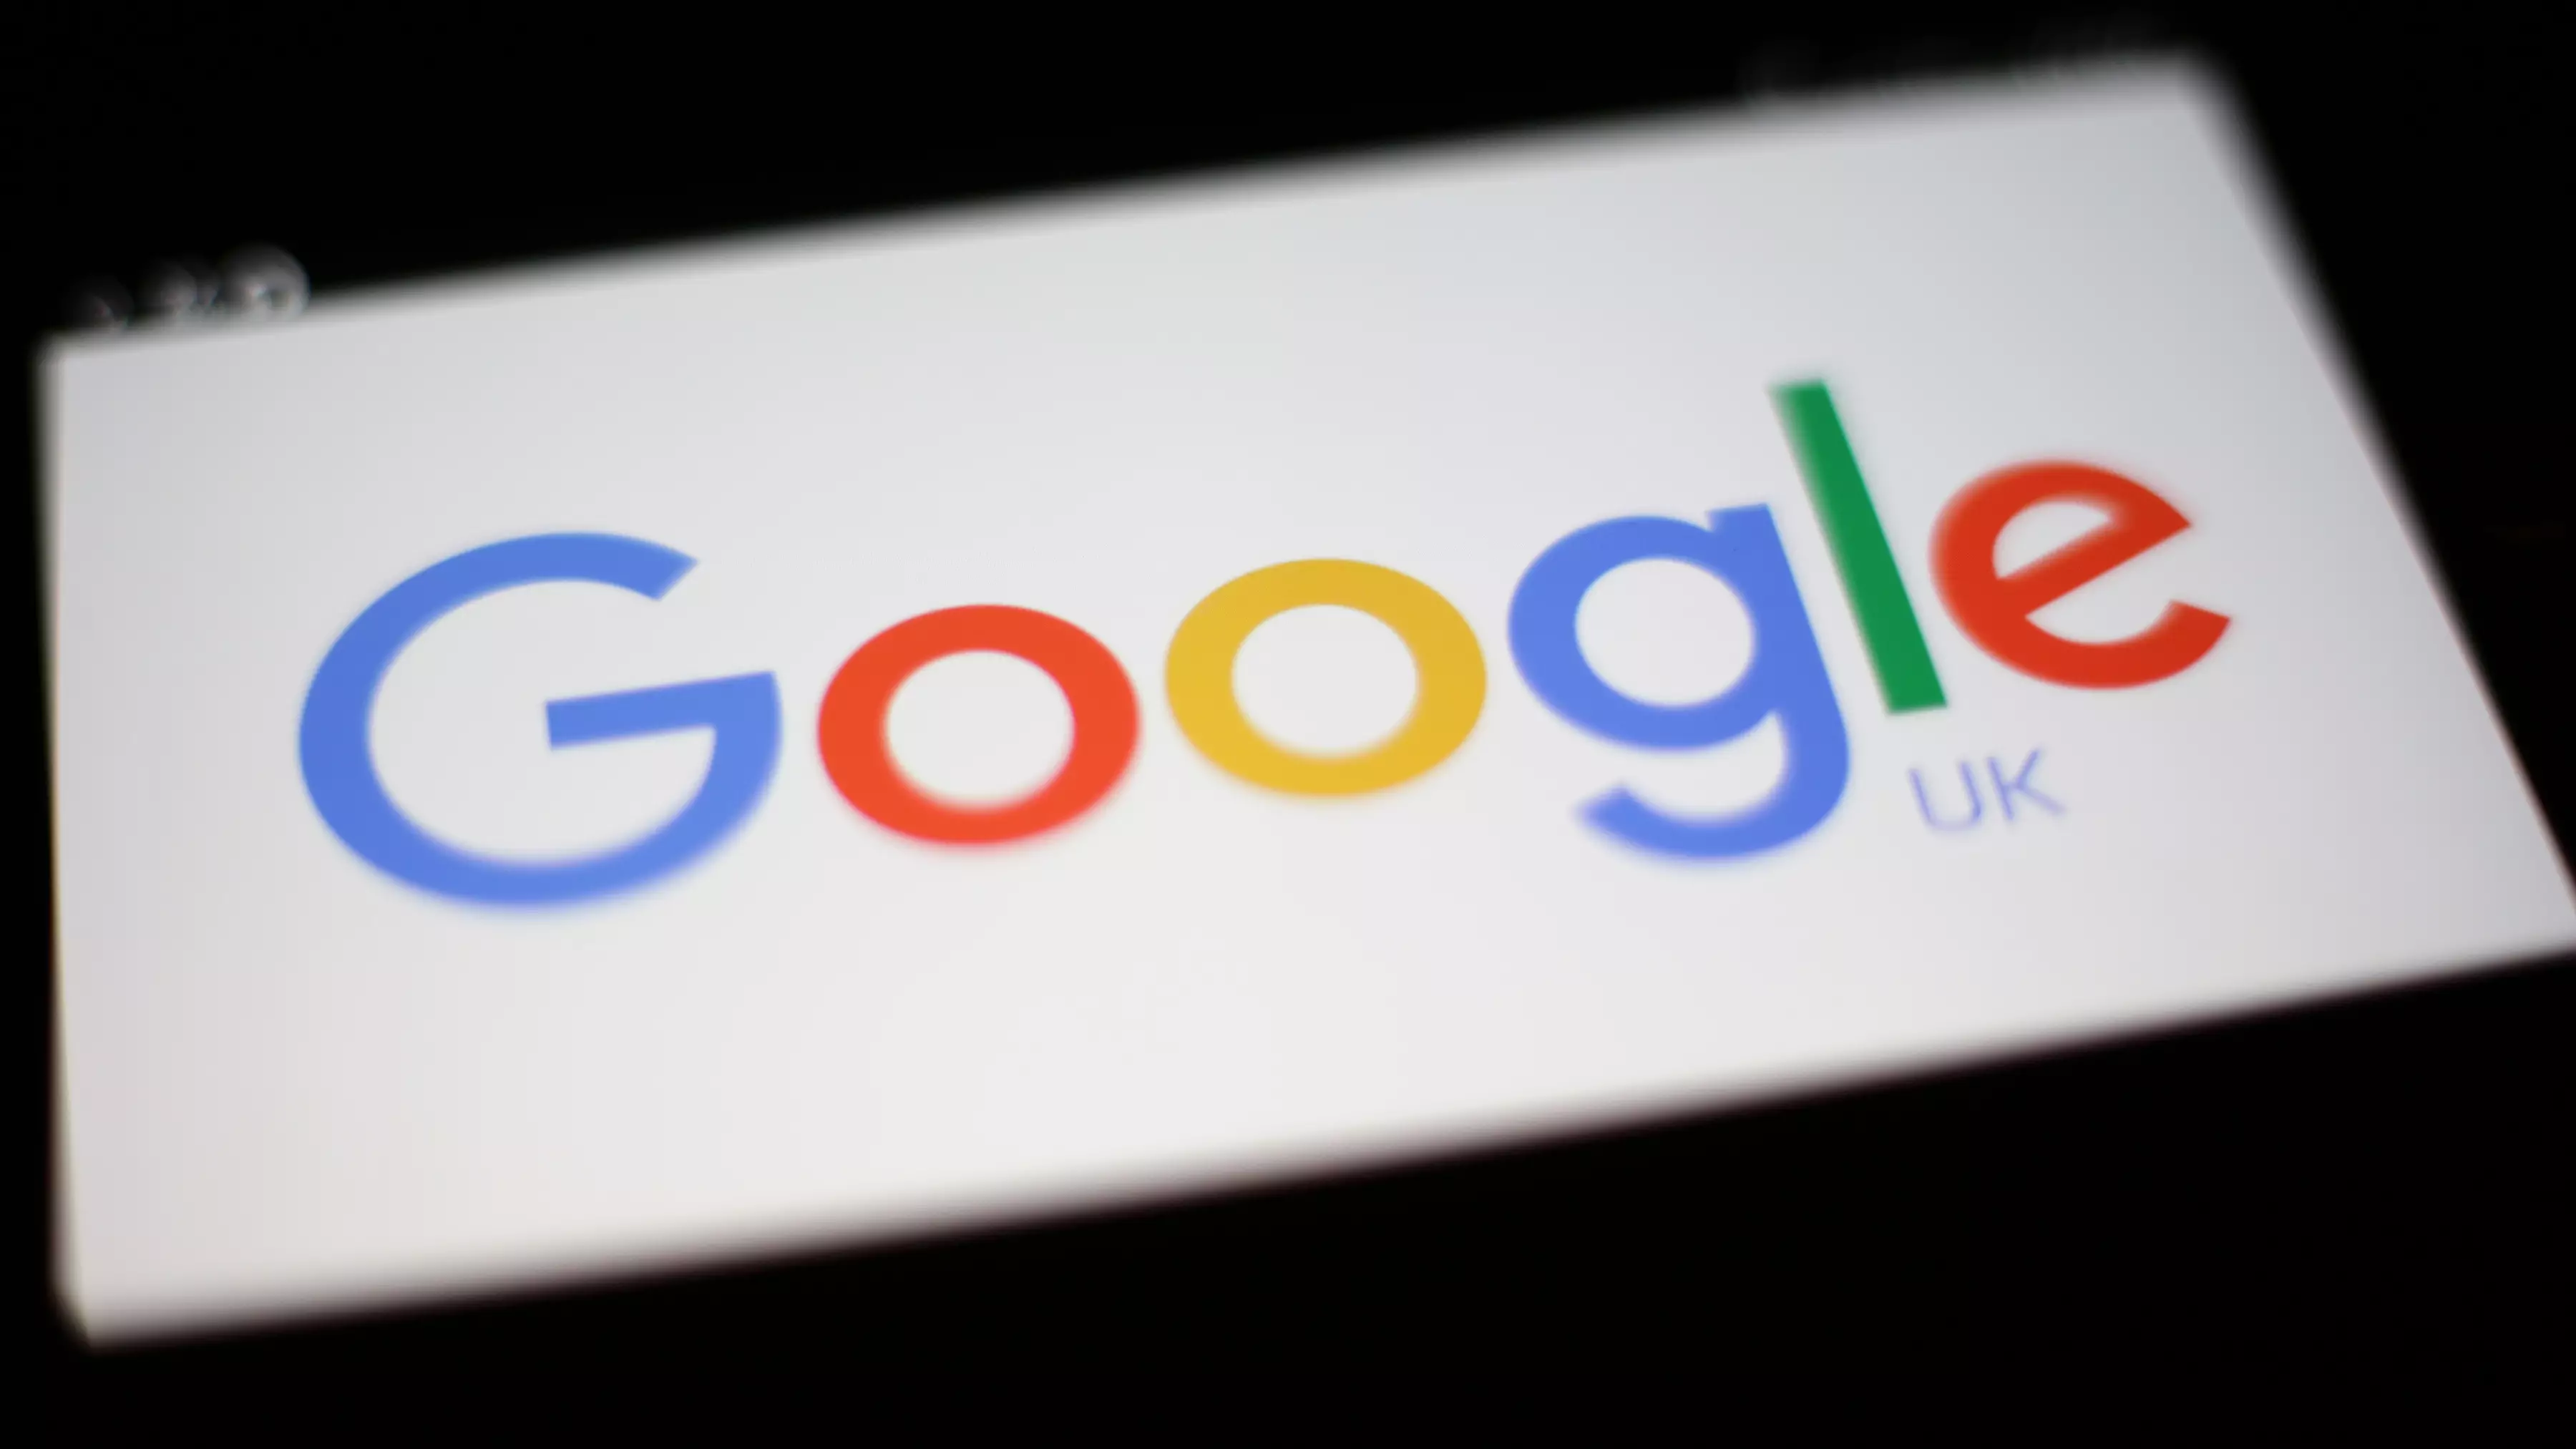 Google Facing $5 Billion Lawsuit For 'Breaching Privacy' Over Incognito Mode Tracking